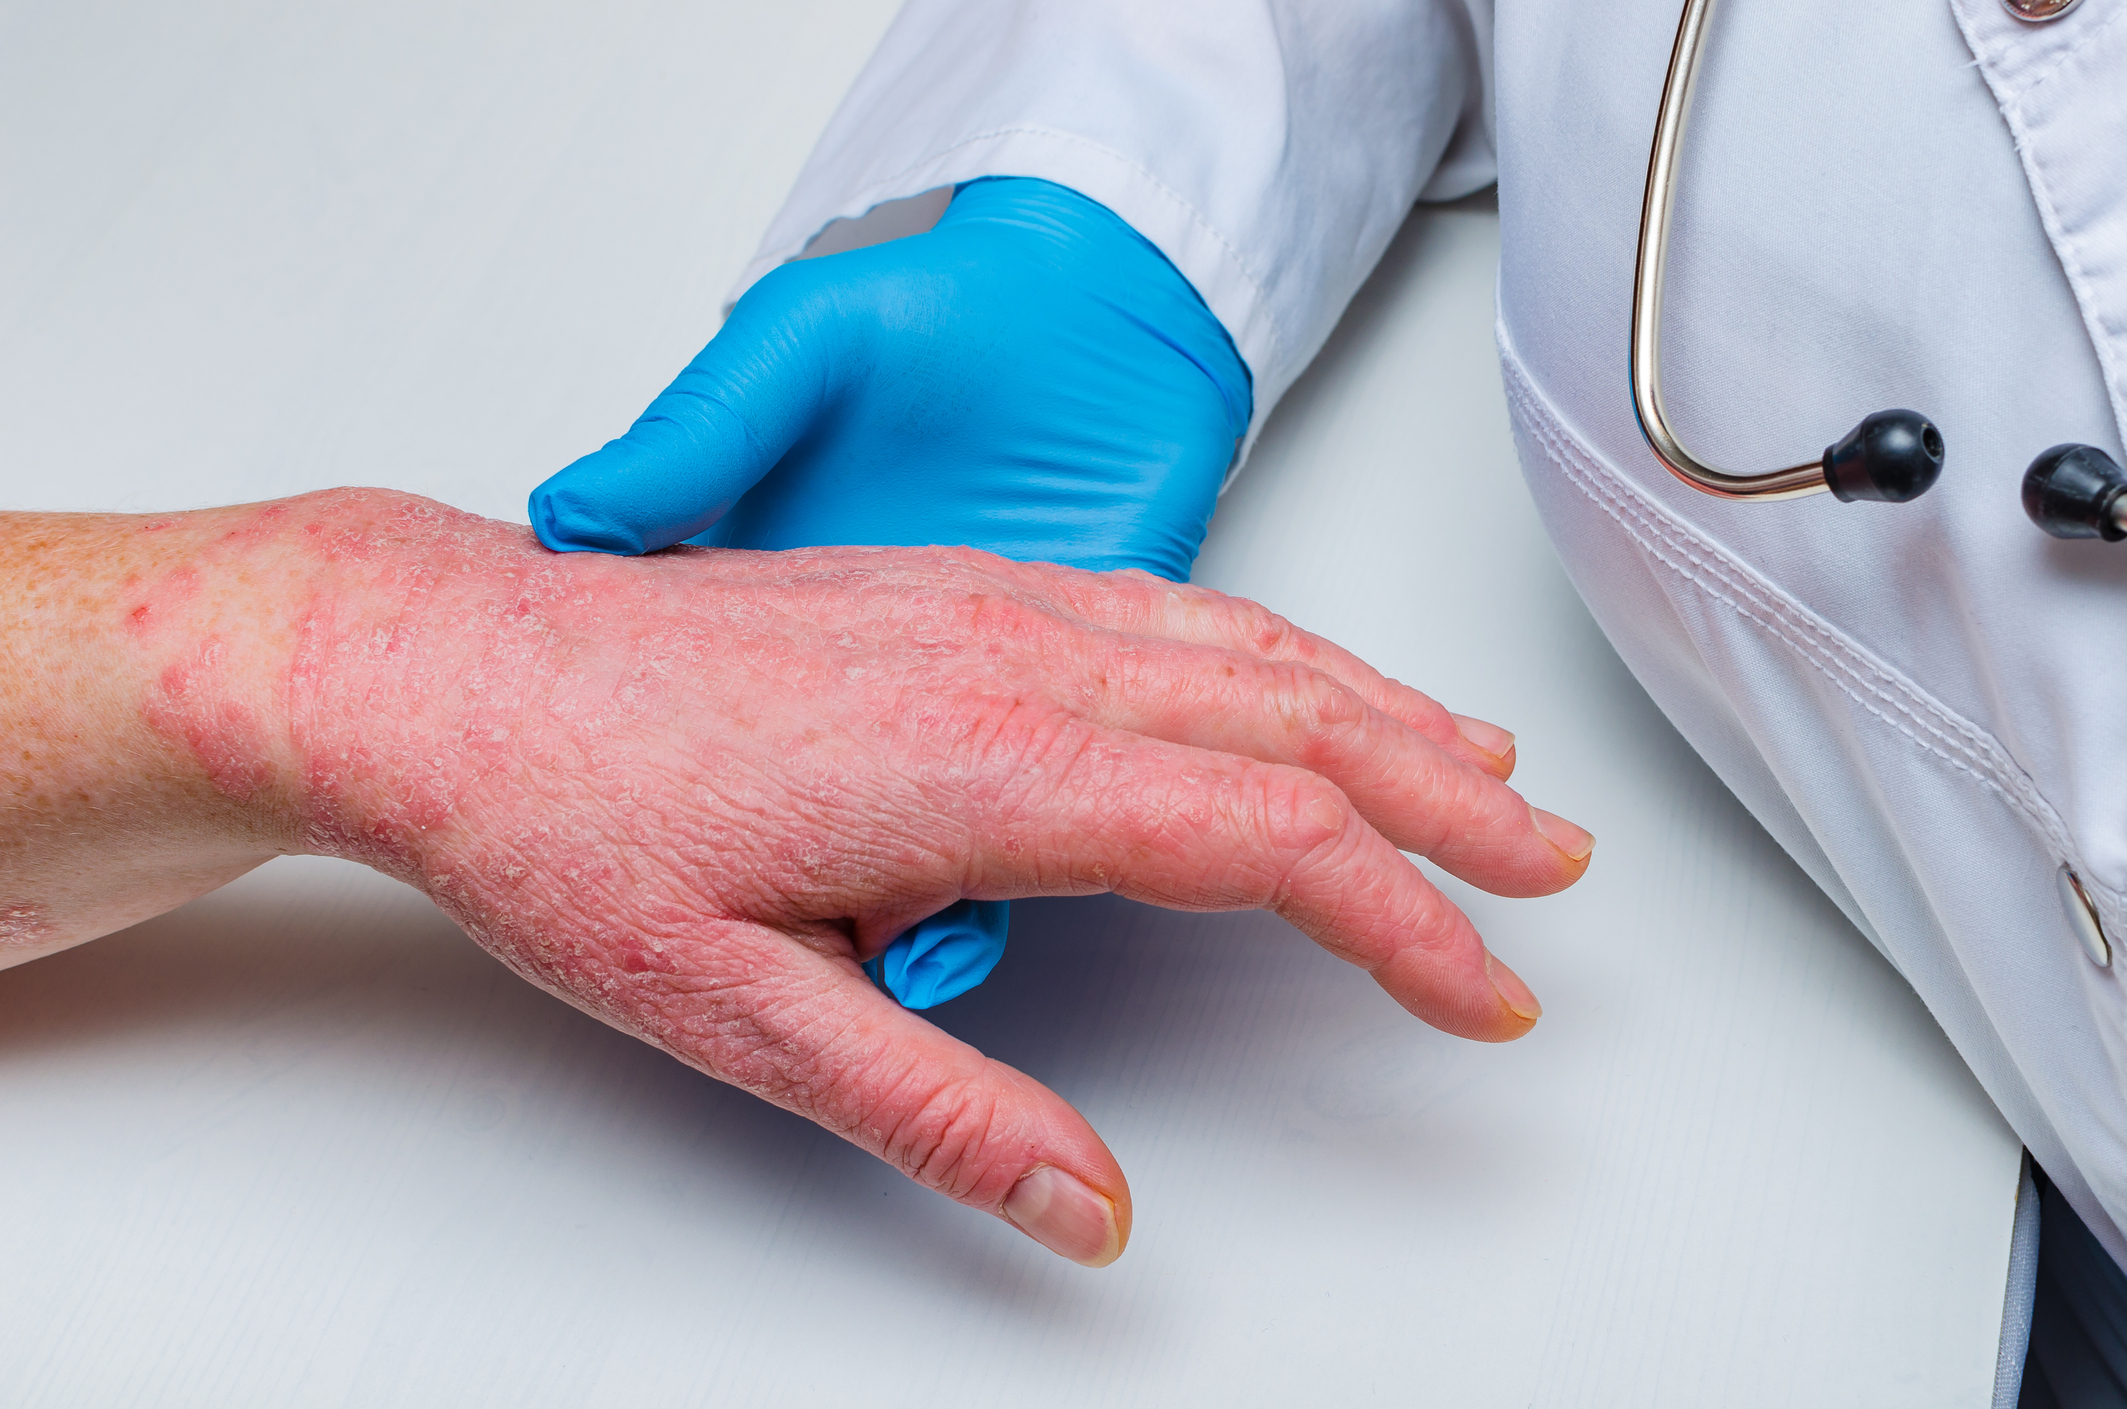 Upadacitinib’s Safety in Patients with Moderate-to-severe Atopic Dermatitis